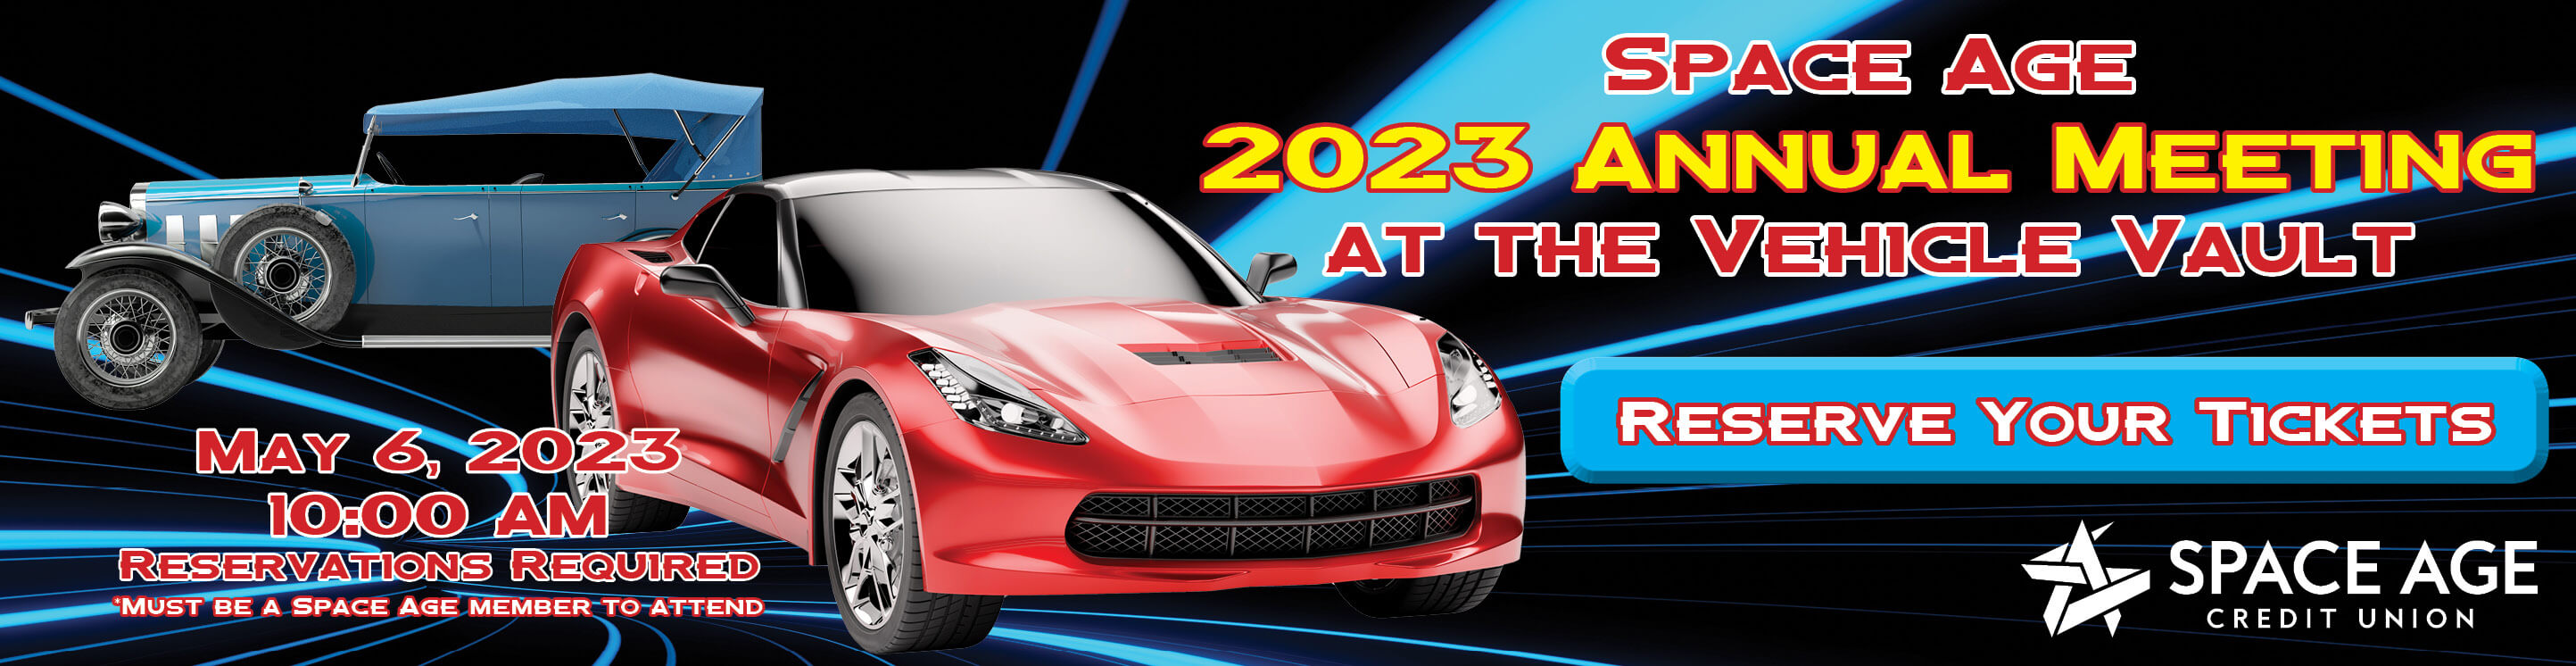 Click here to reserve your tickets for the 2023 Space Age Annual Meeting at the Vehicle Vault